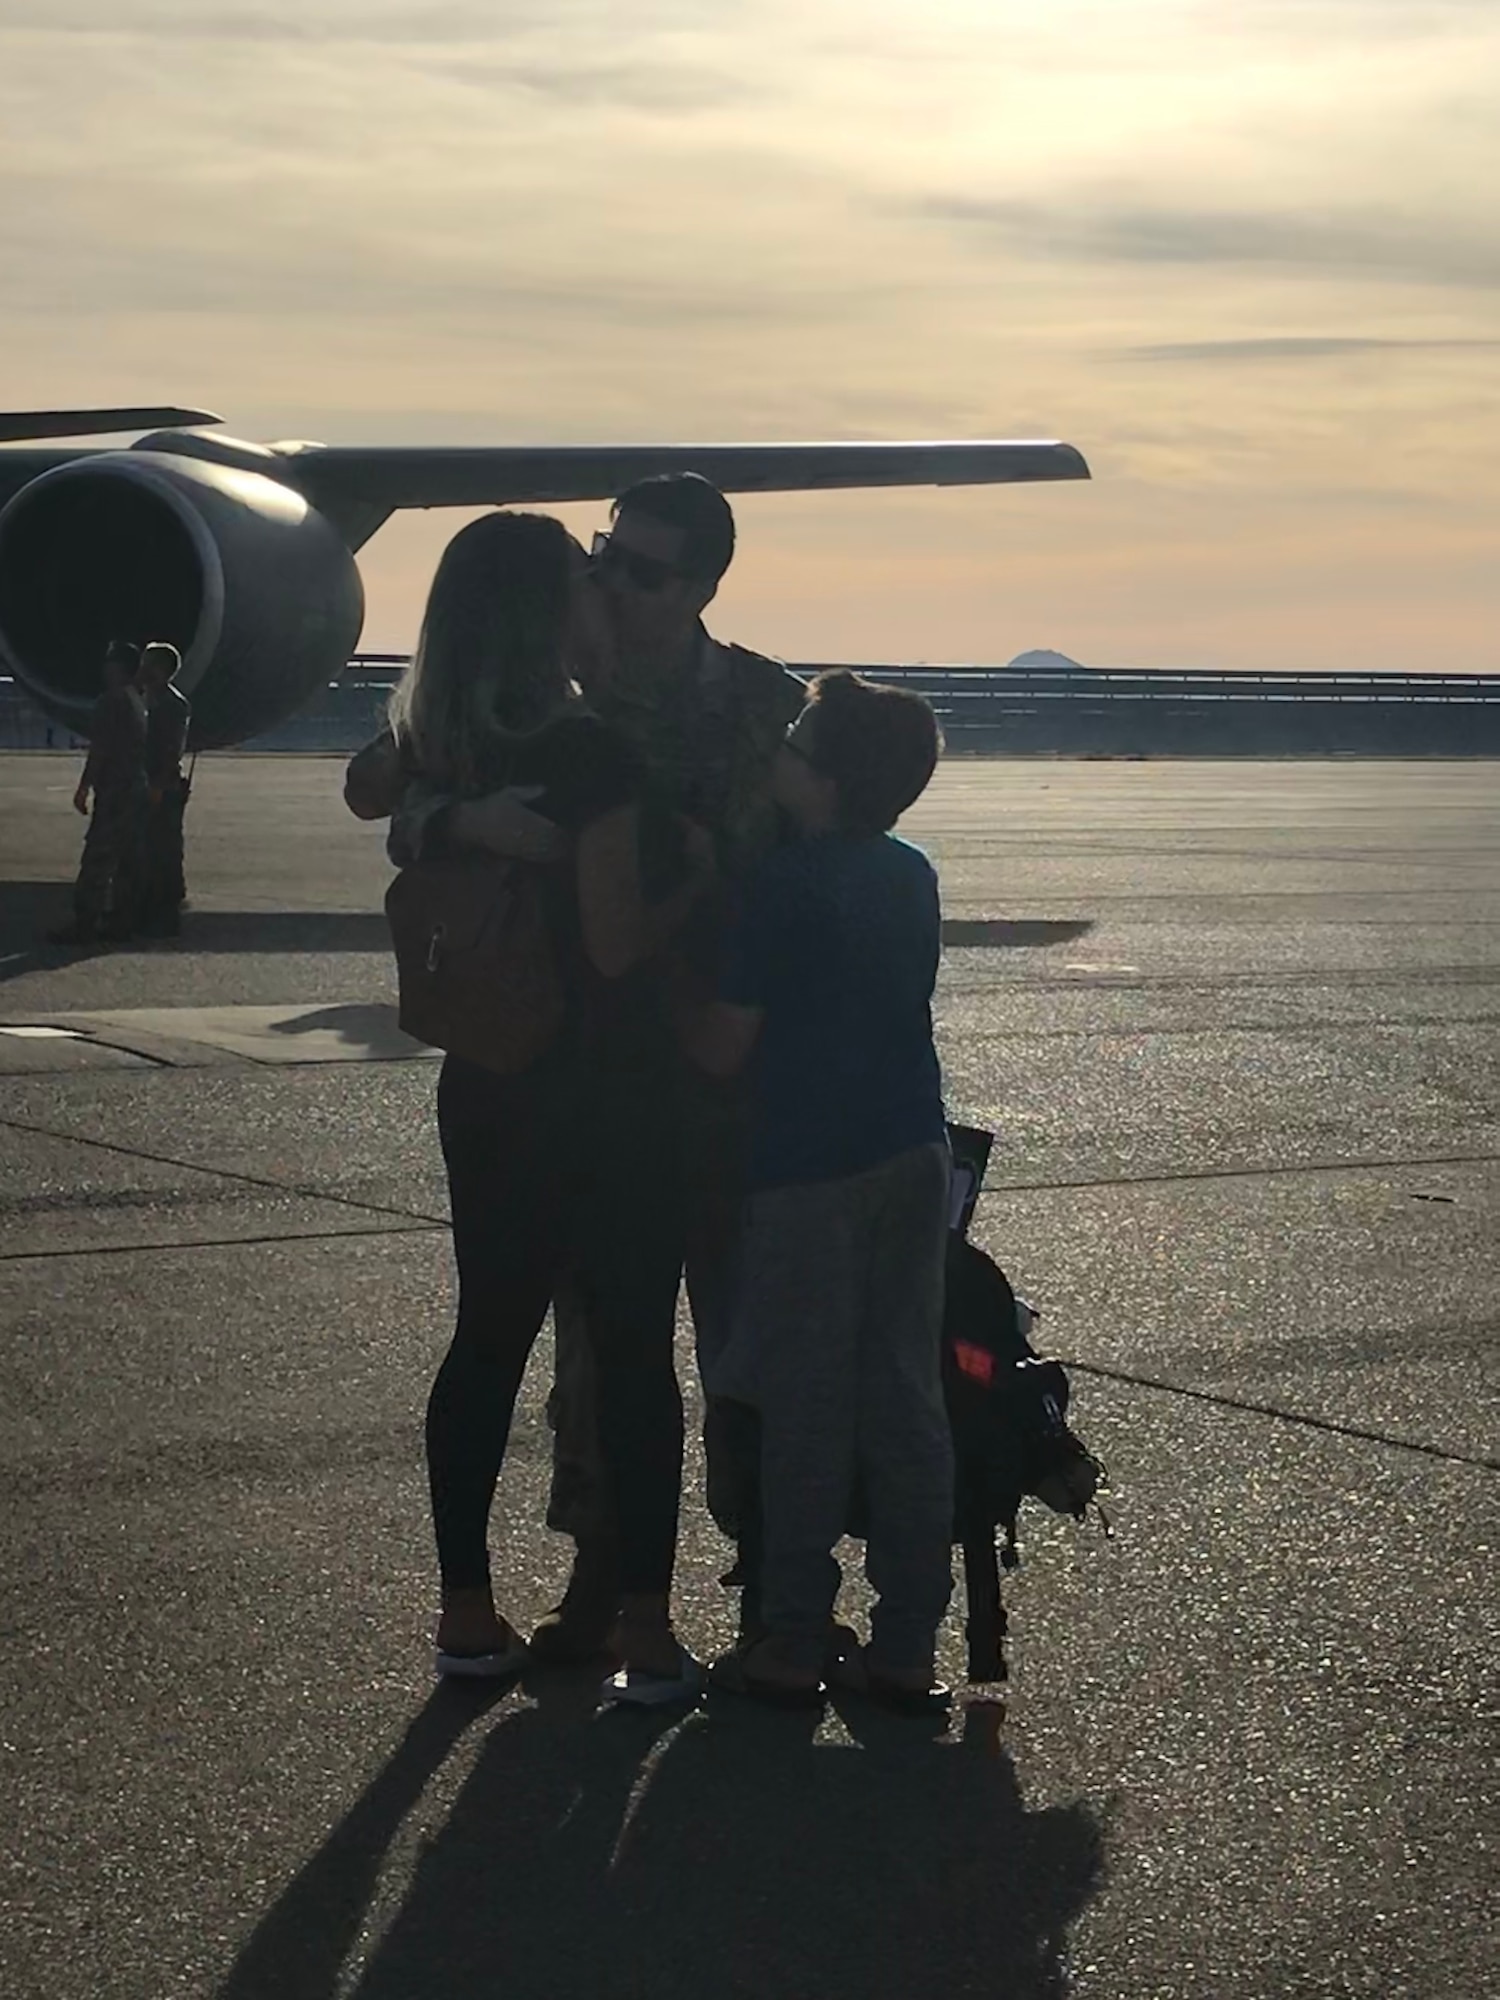 Master Sgt. Michael Carrillo, a dedicated crew chief with the 940th Aircraft Maintenance Squadron, gives hugs and kisses to his wife and son June 14, 2020, at Beale Air Force Base, California.